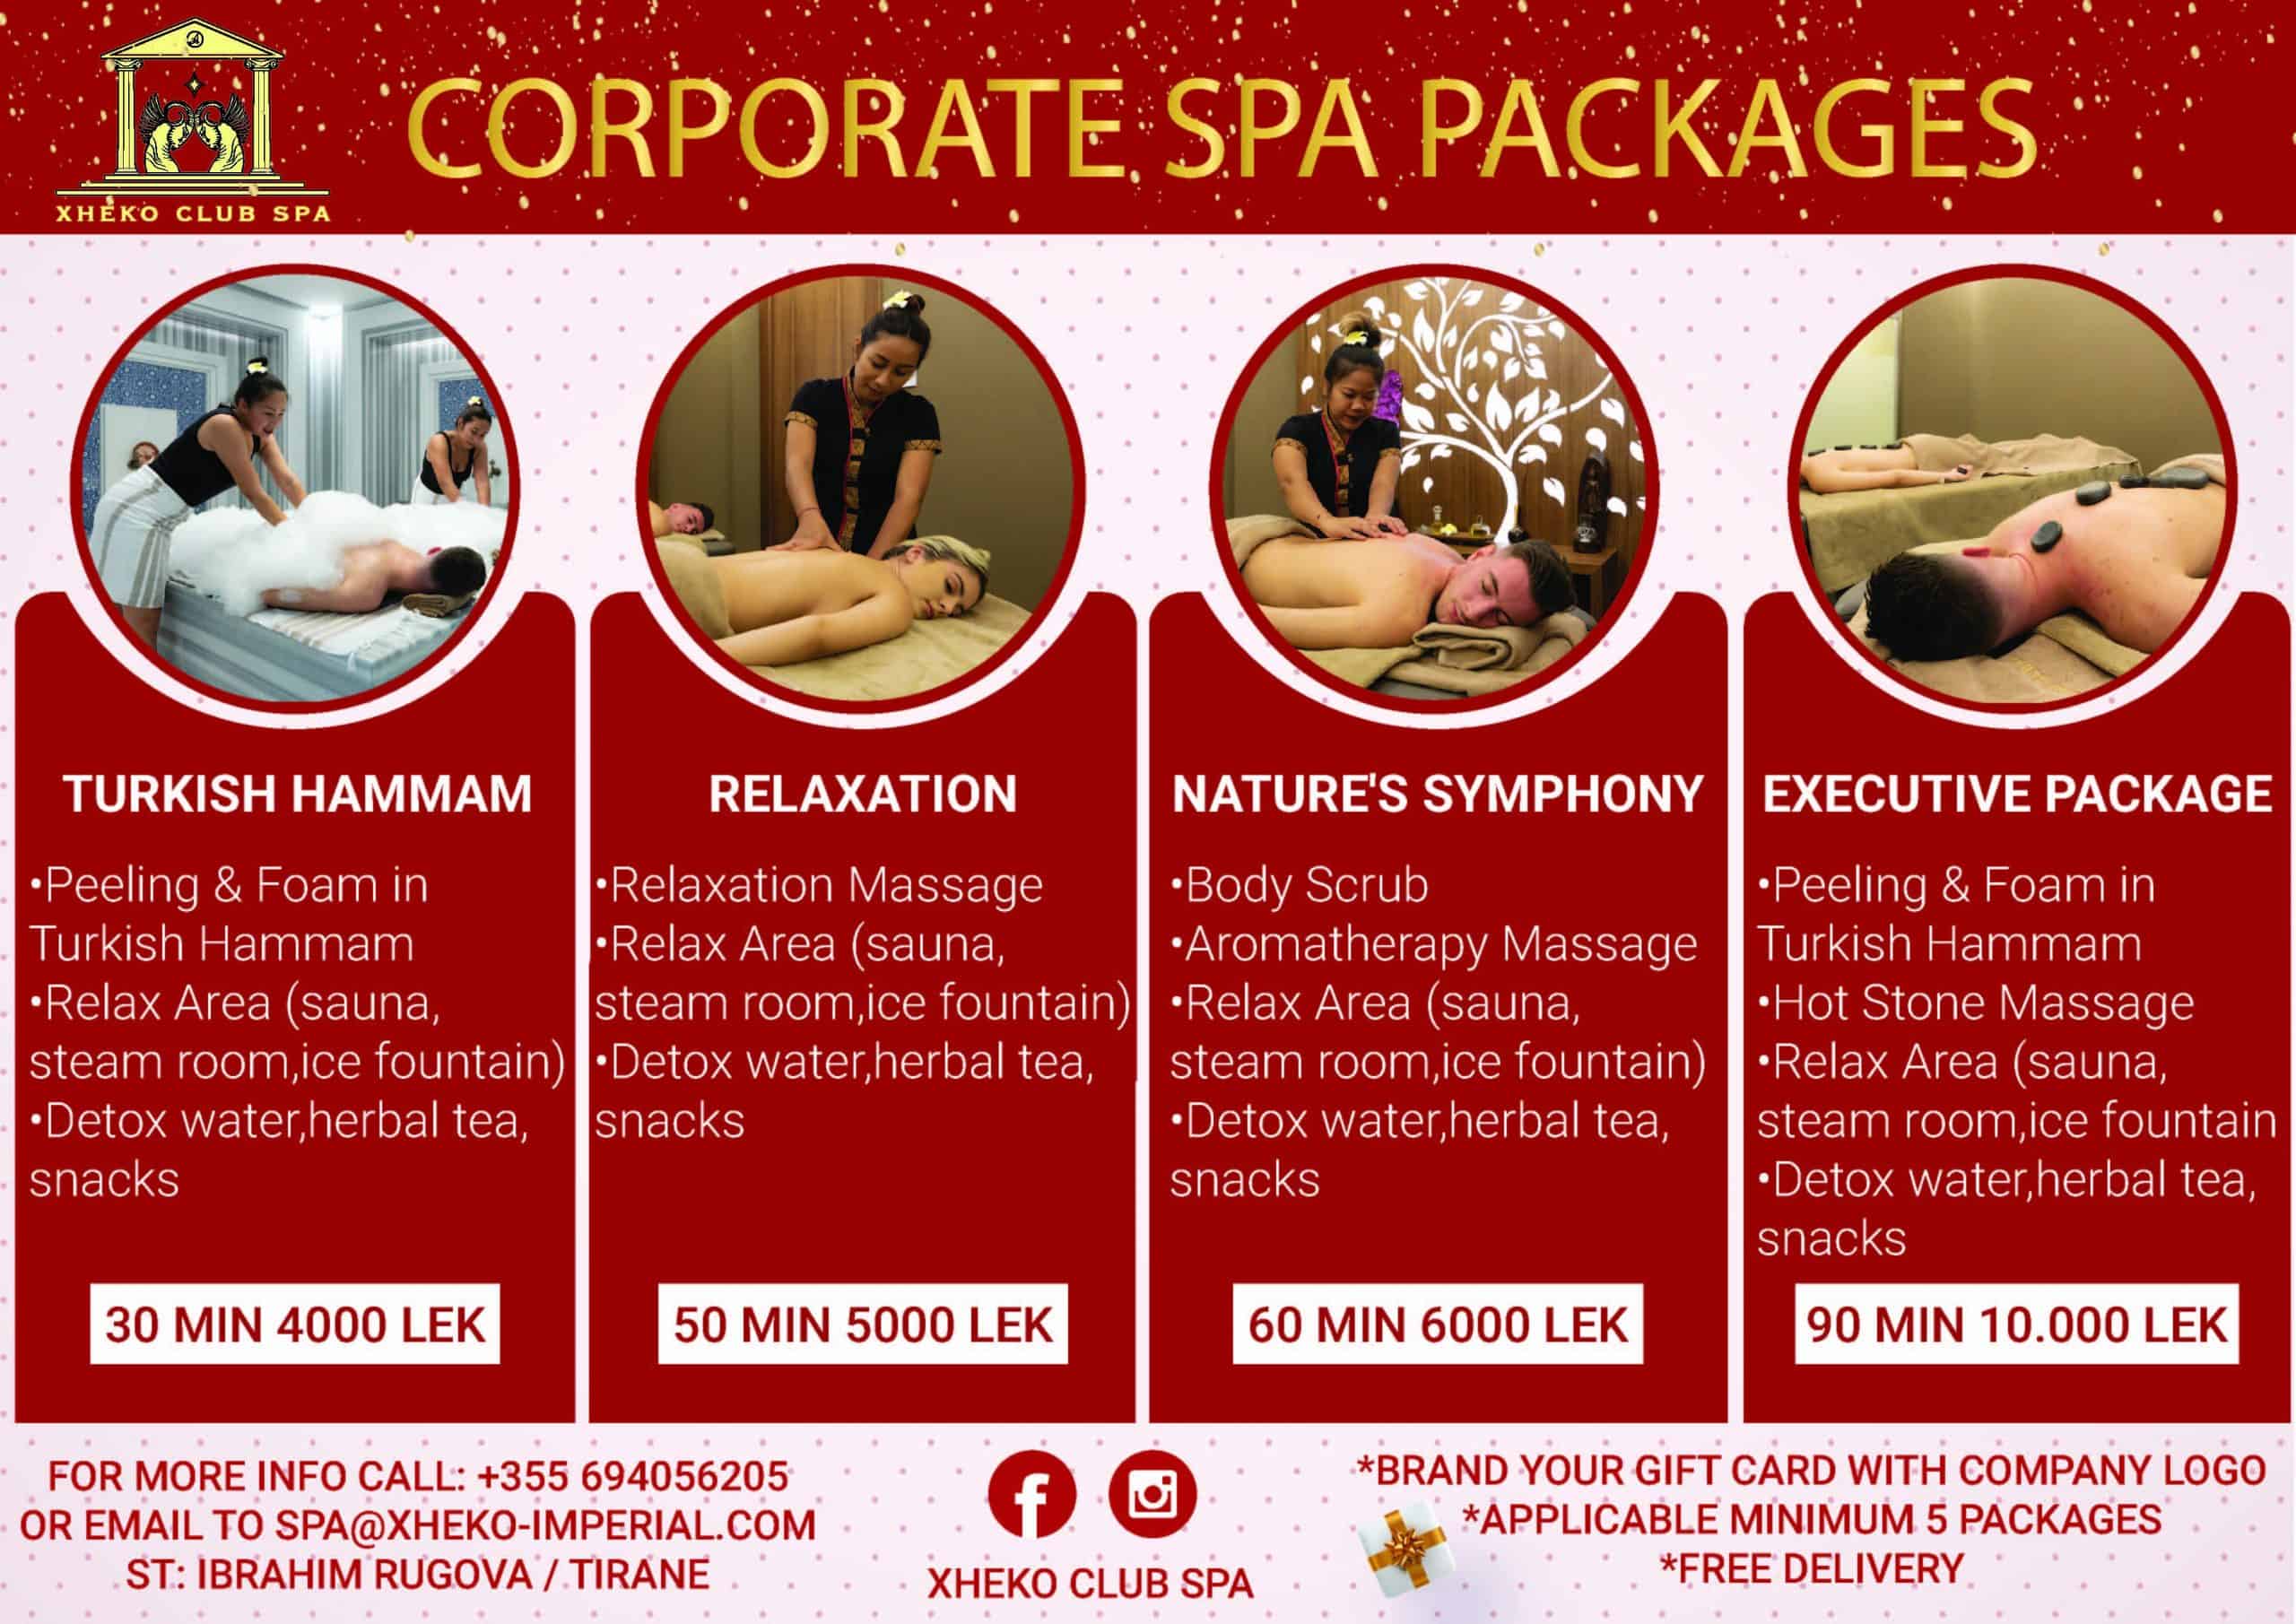 Corporate SPA Packages for AmCham members